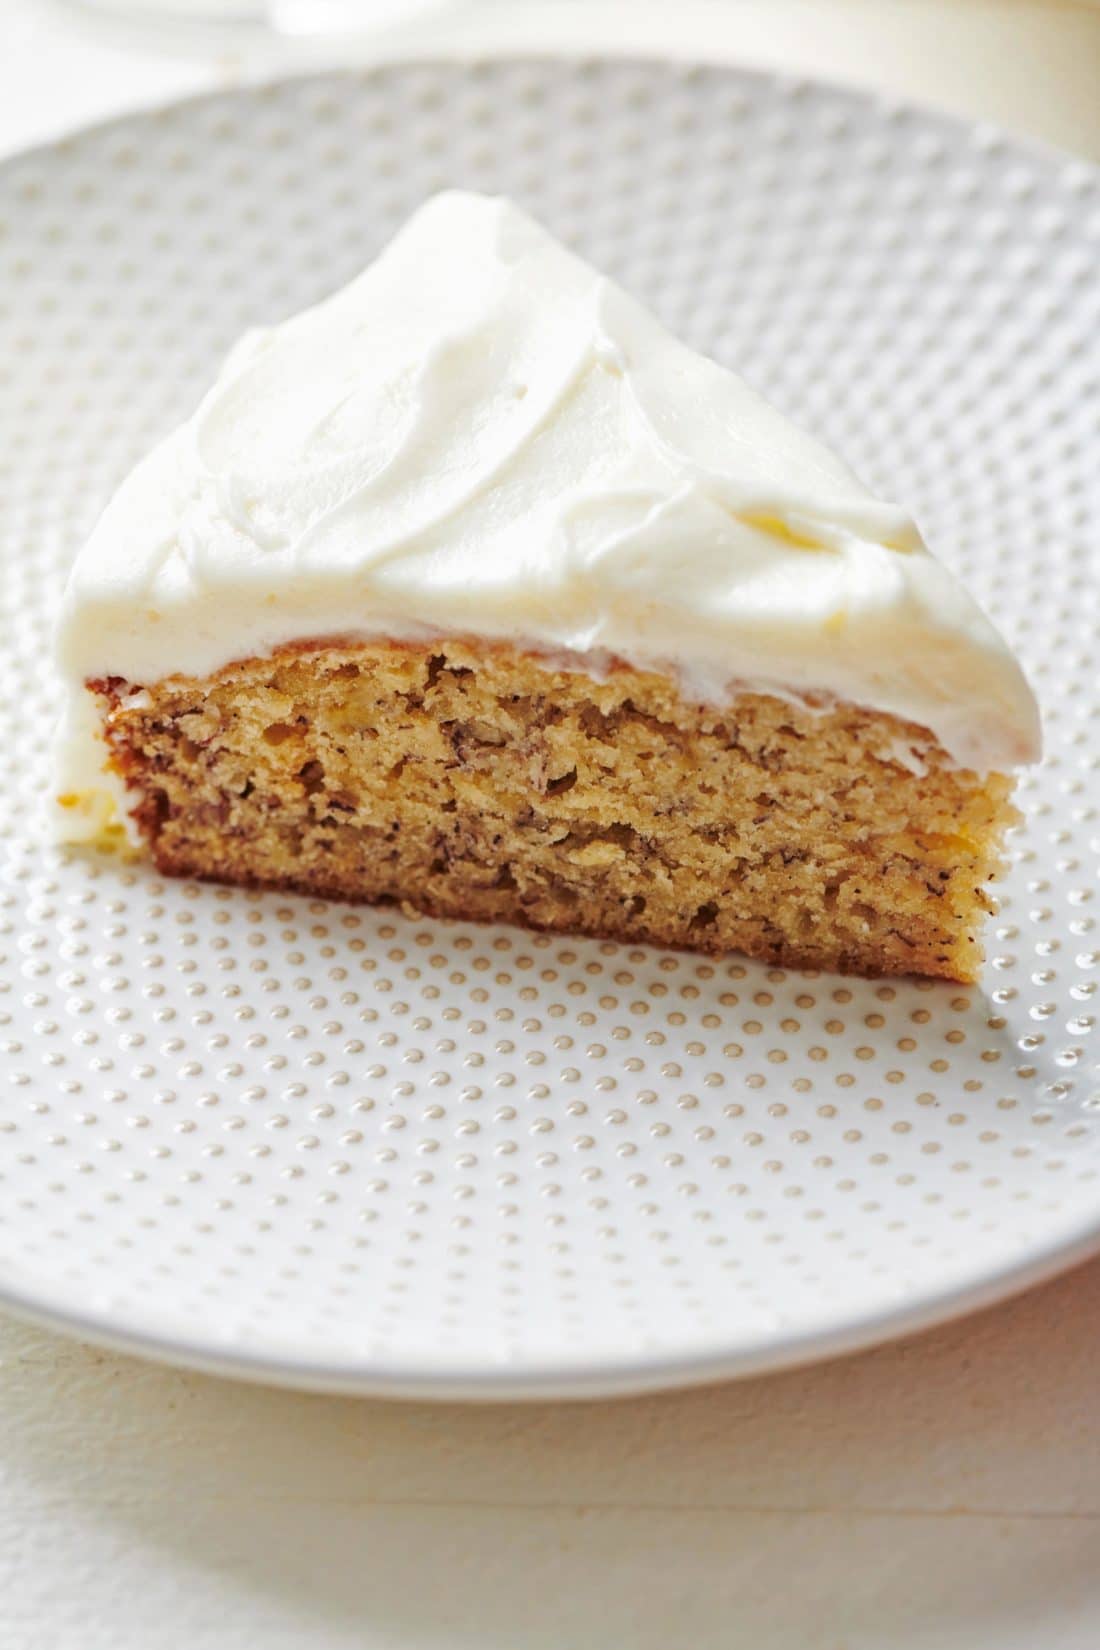 Slice of Banana Cake with Cream Cheese Frosting on a plate.